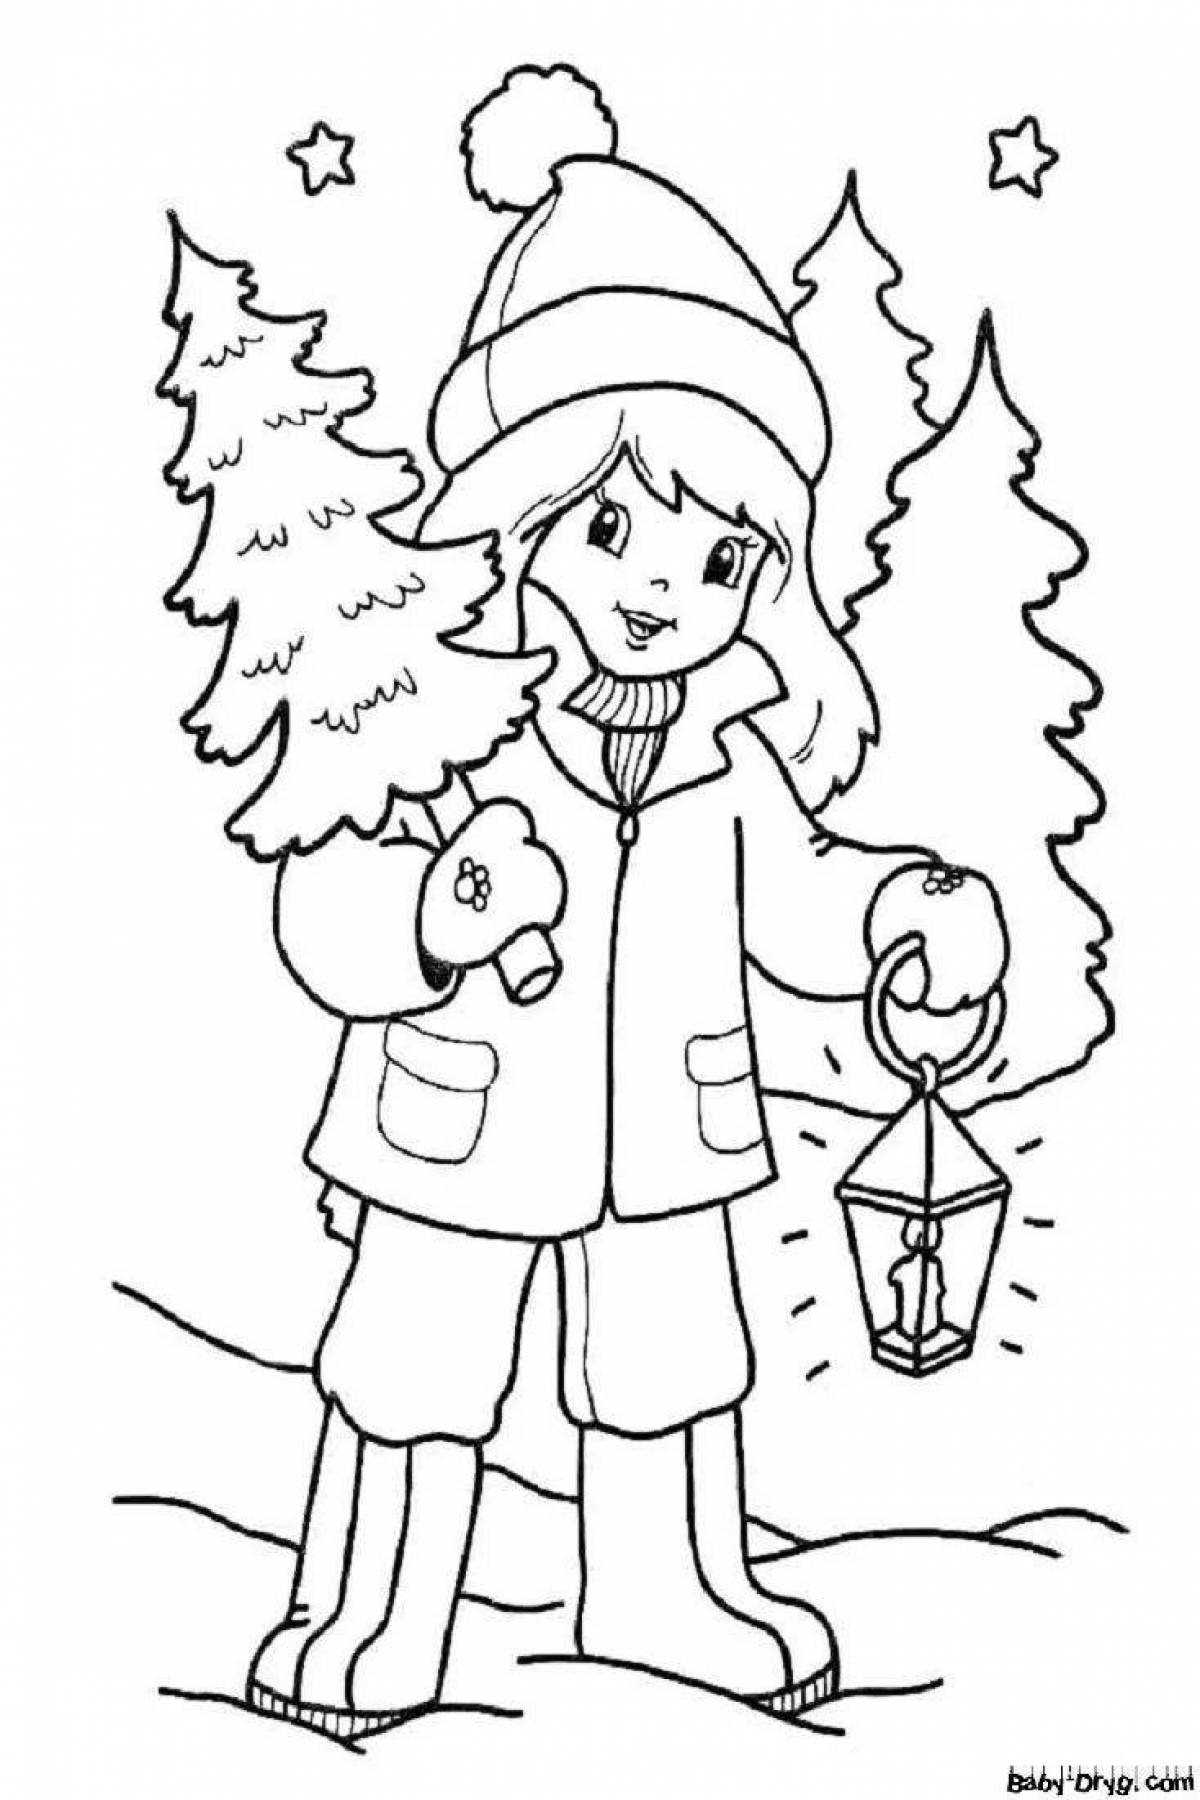 A magical Christmas coloring book for 3-4 year olds